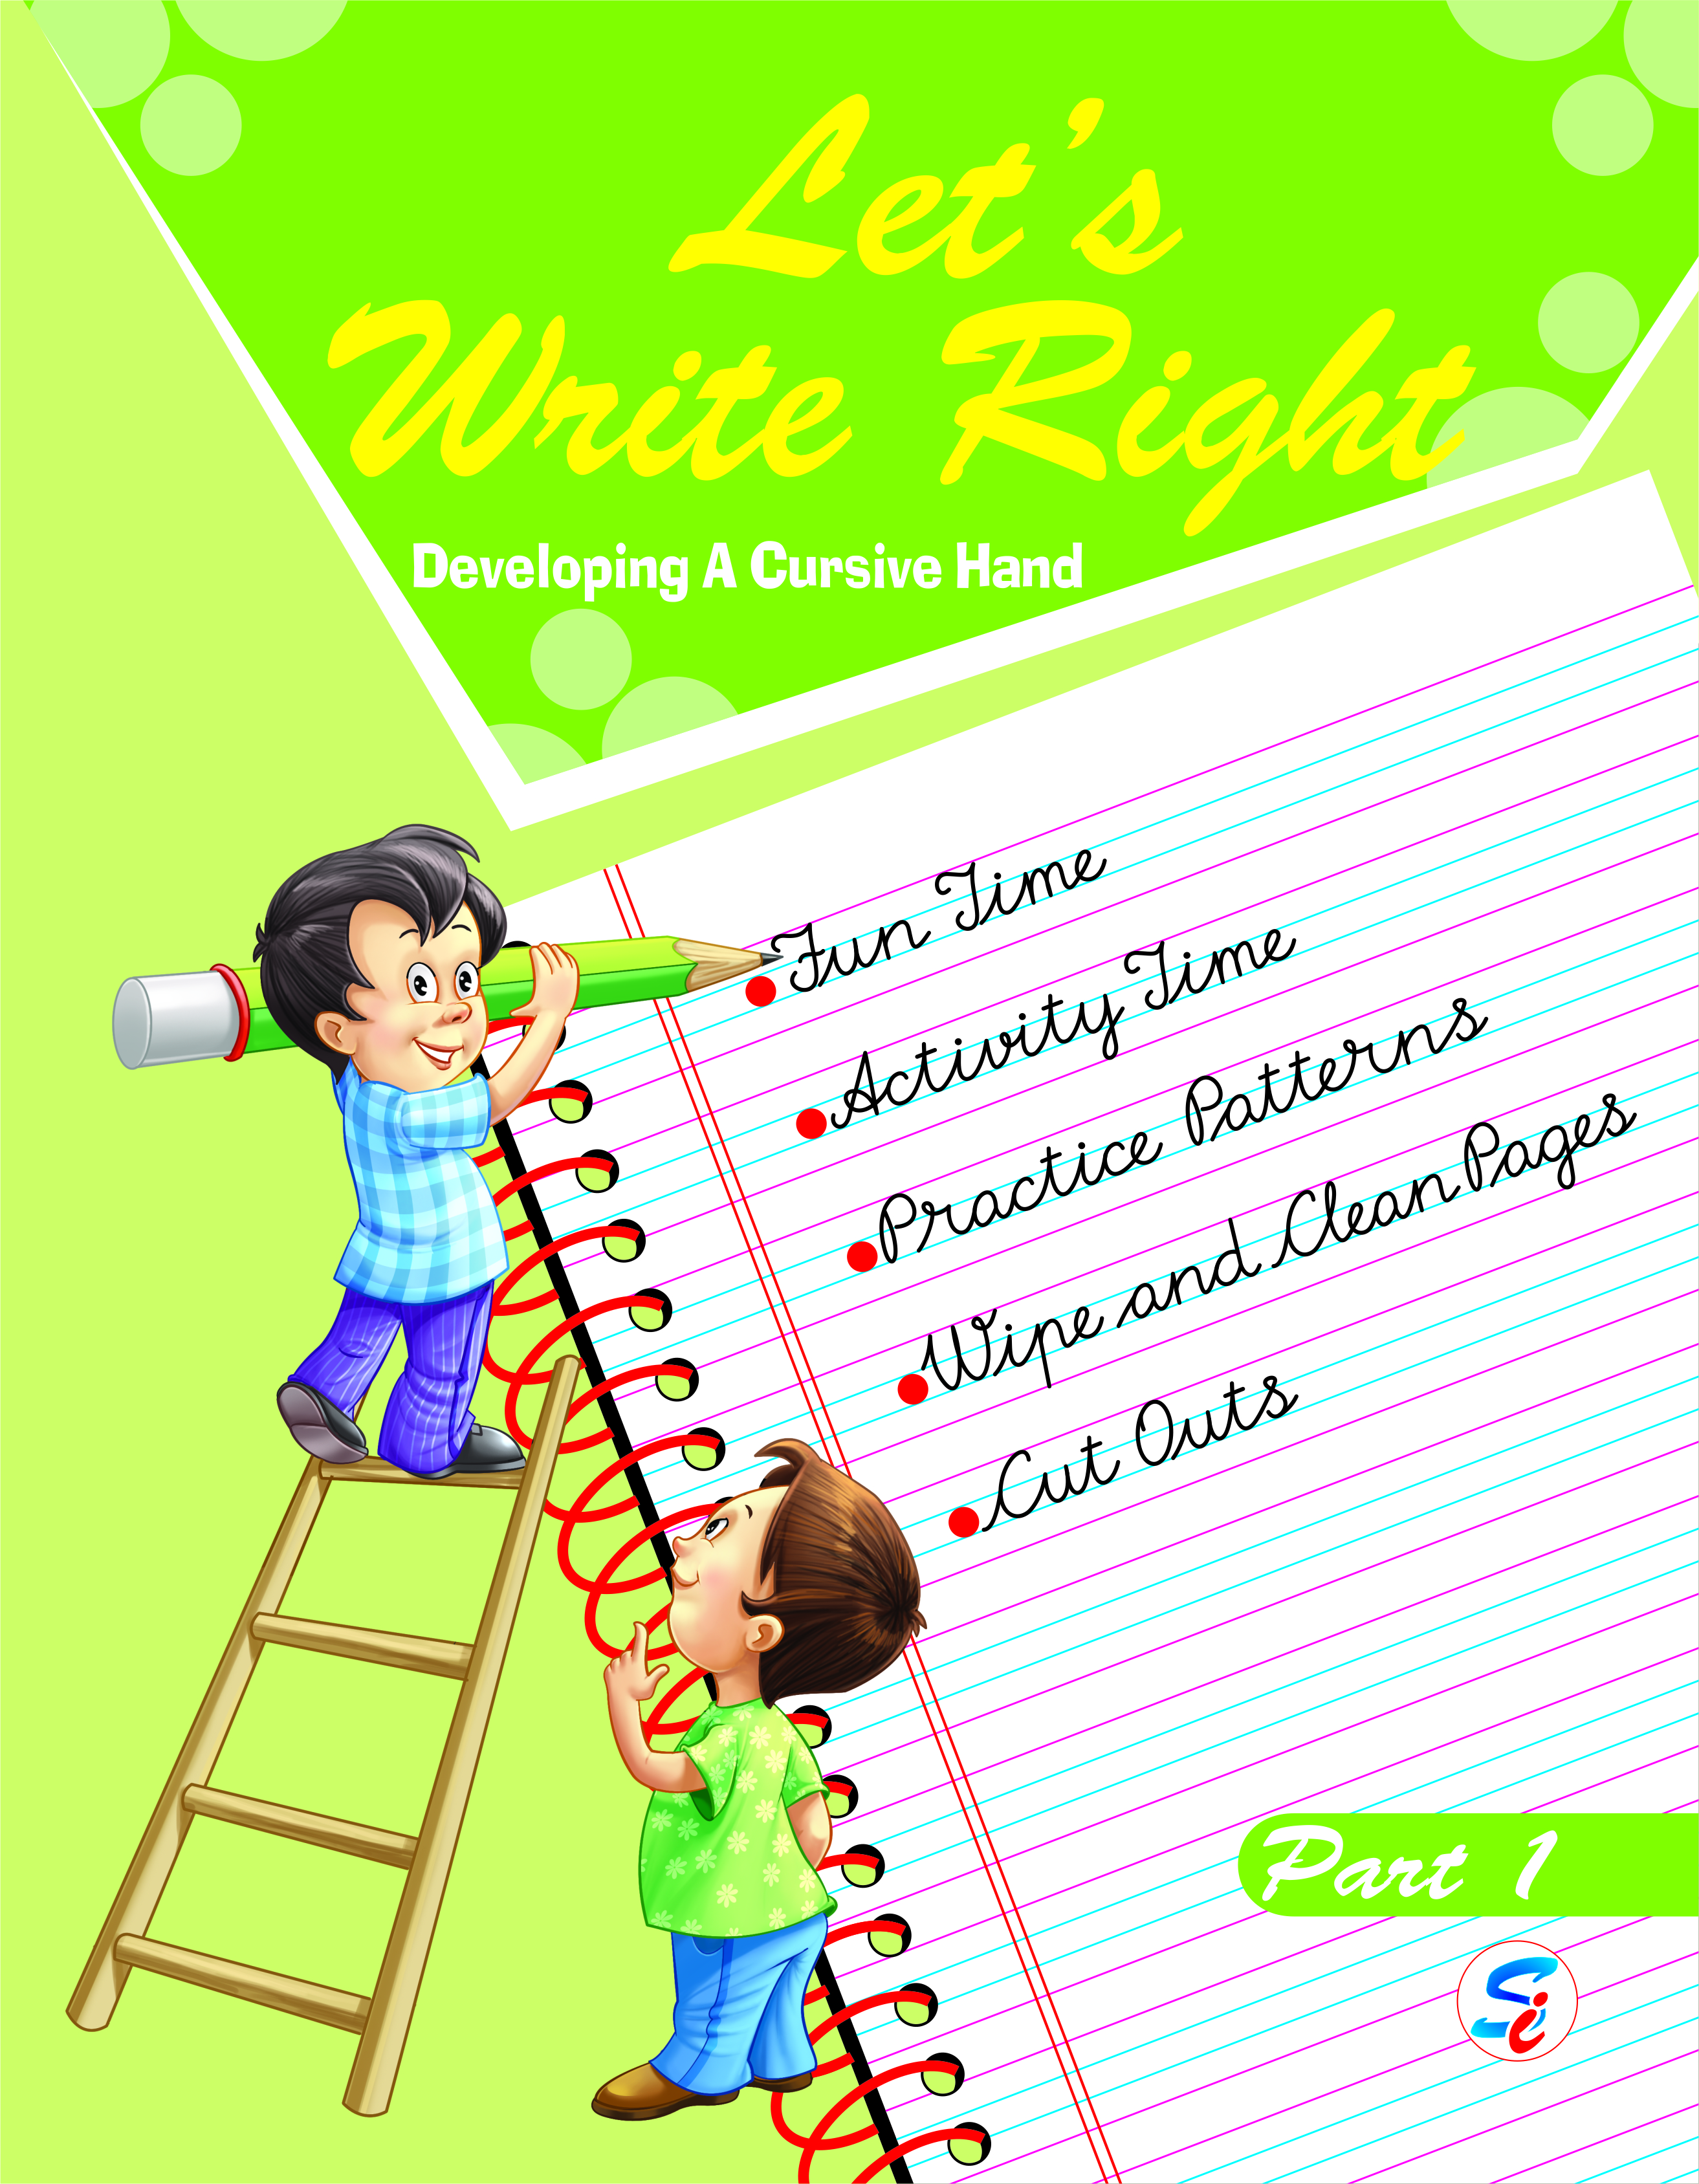 LET'S WRITE RIGHT PART 1